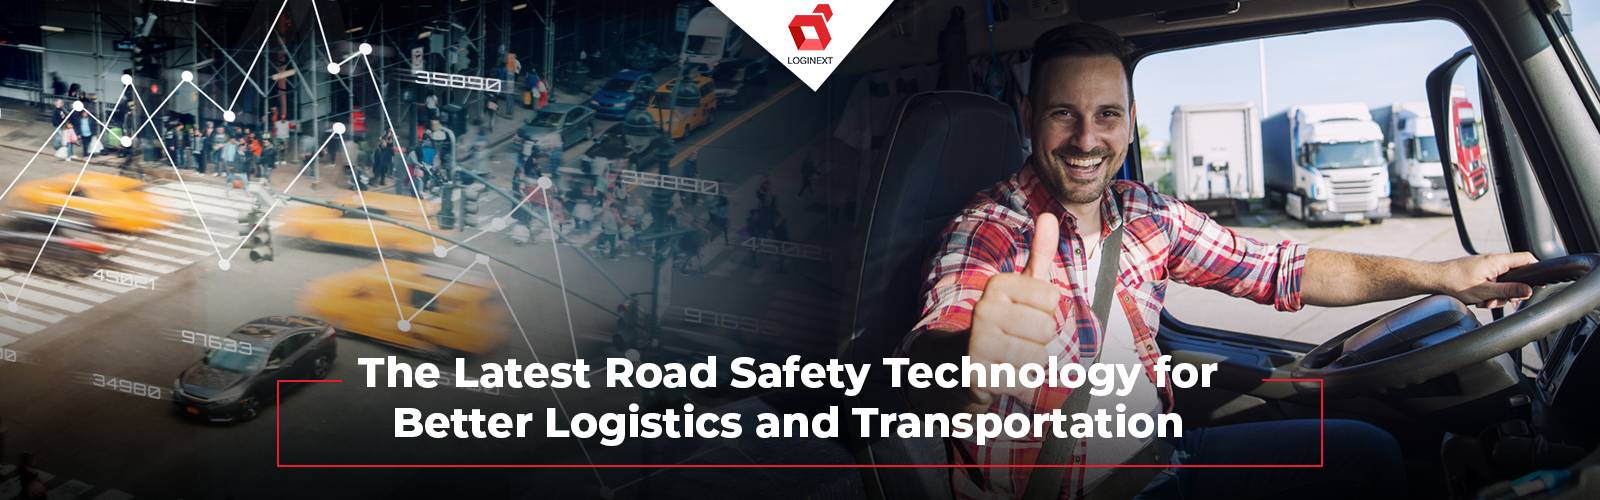 Learn 5 Road Safety Technology Trends in Logistics and Transportation